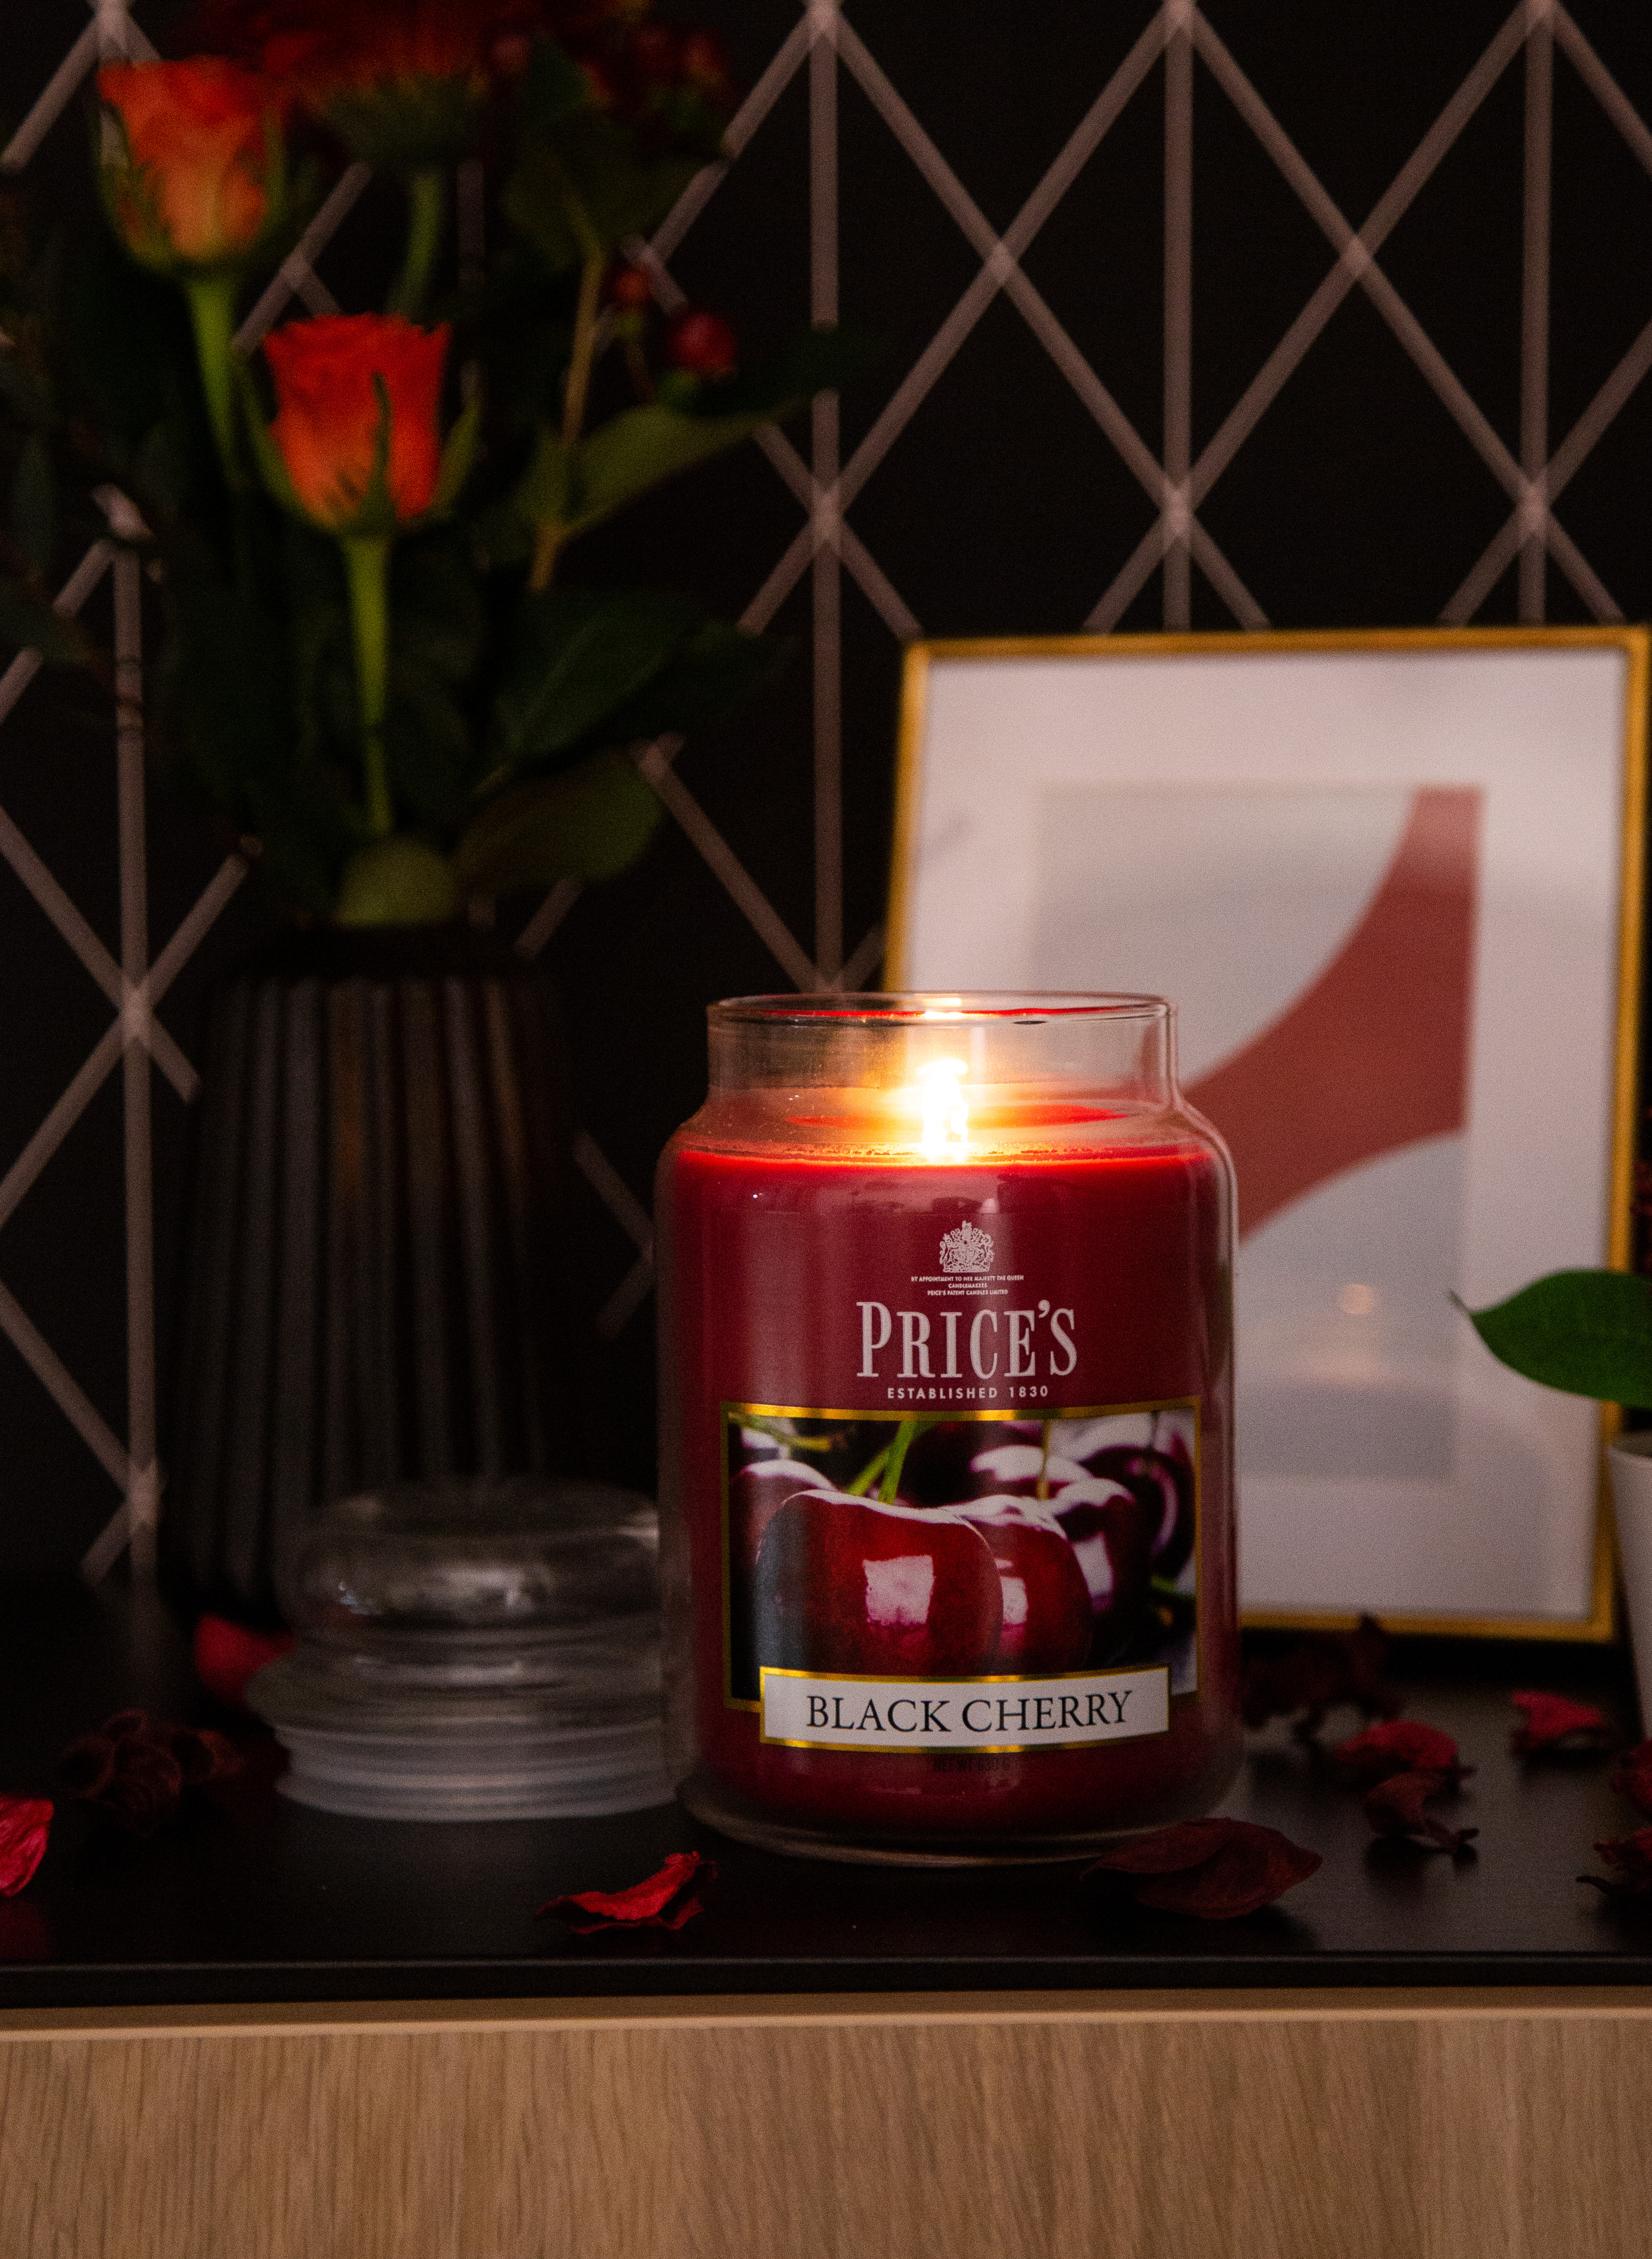 Prices Candle "Black Cherry" 630g